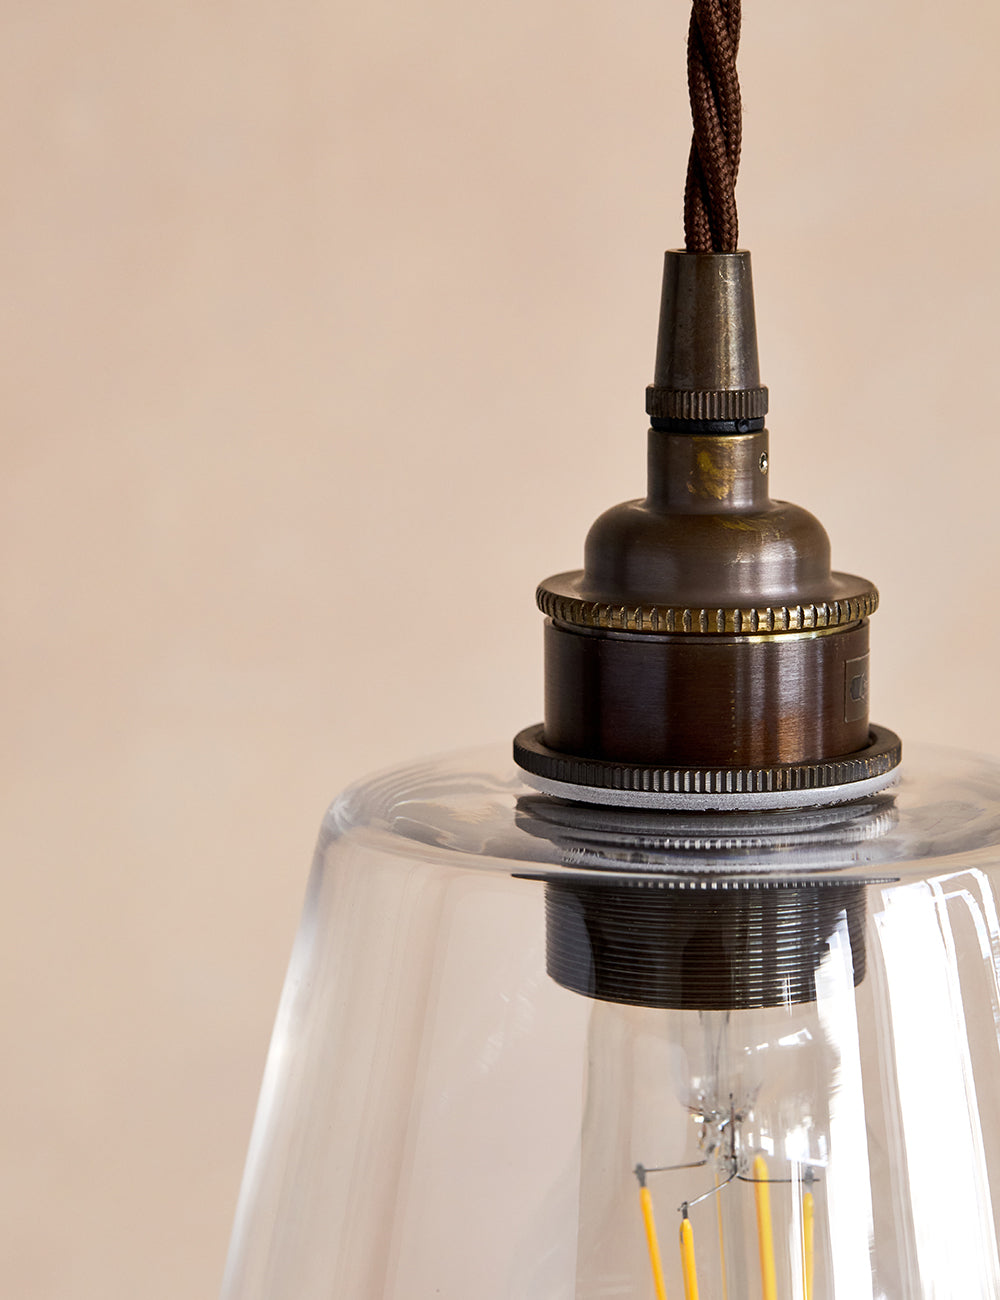 Old School Electric Tapered Glass Pendant Light - Small